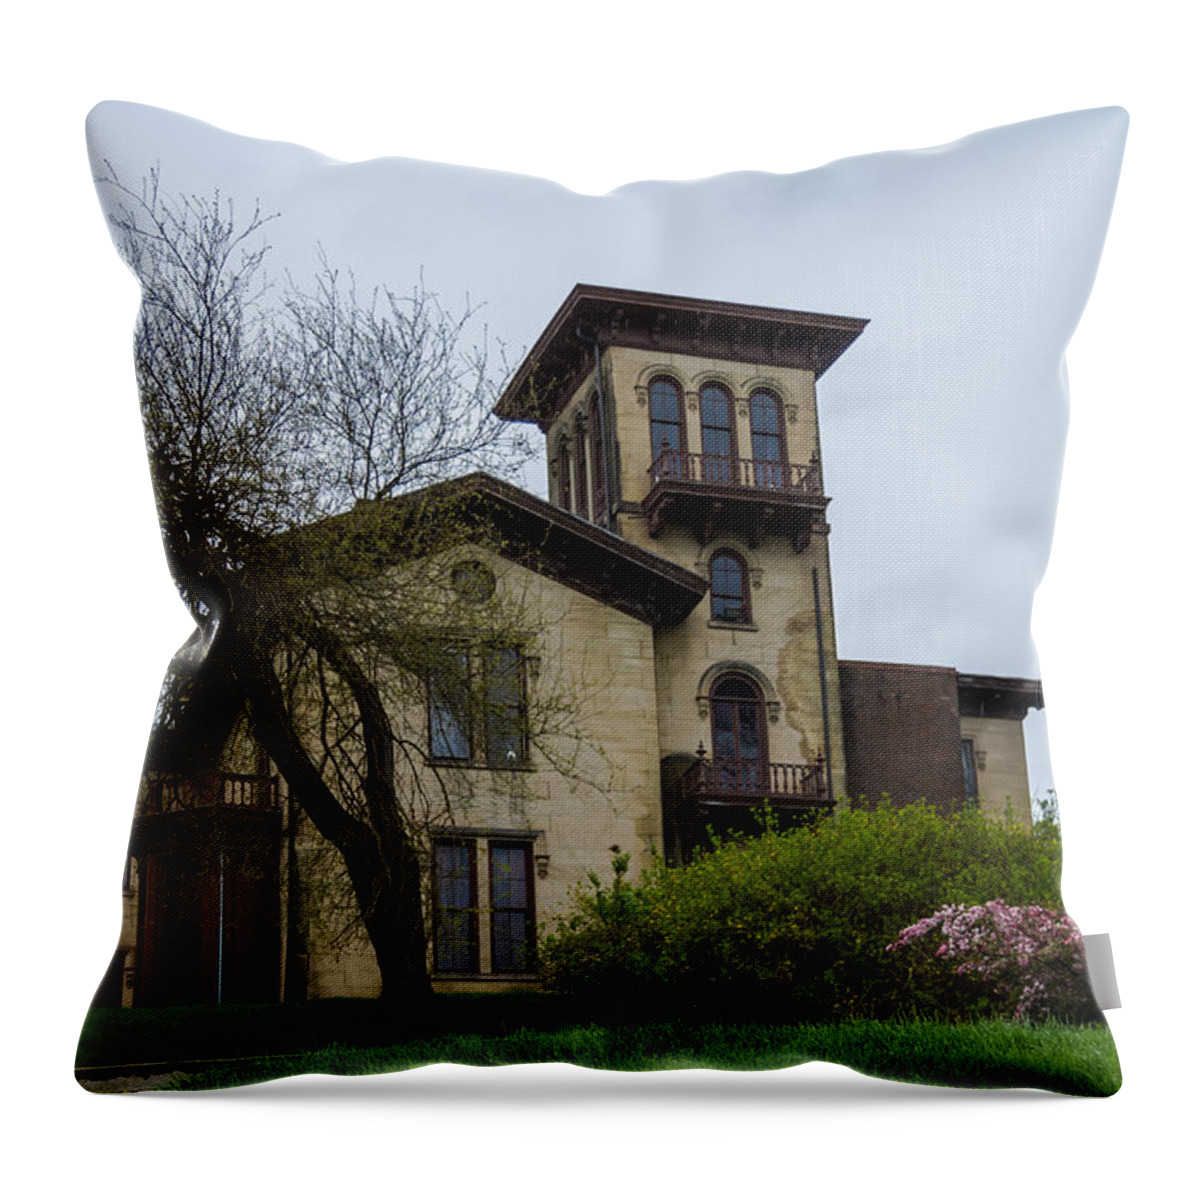 Anchorage Throw Pillow featuring the photograph The Anchorage - Putnam Villa by Holden The Moment